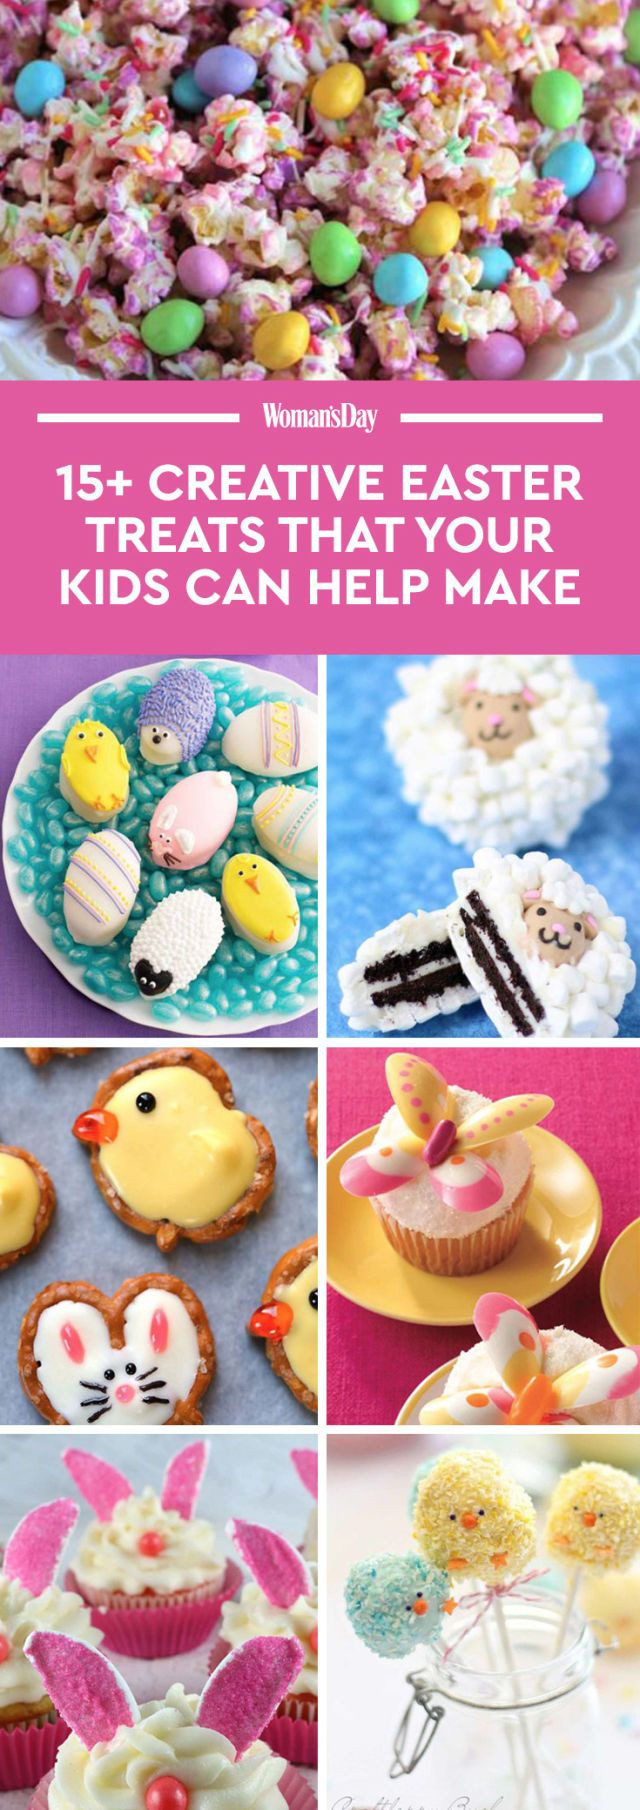 Easter Desserts For Kids
 20 Cute Easter Treats for Kids Easy Ideas for Easter